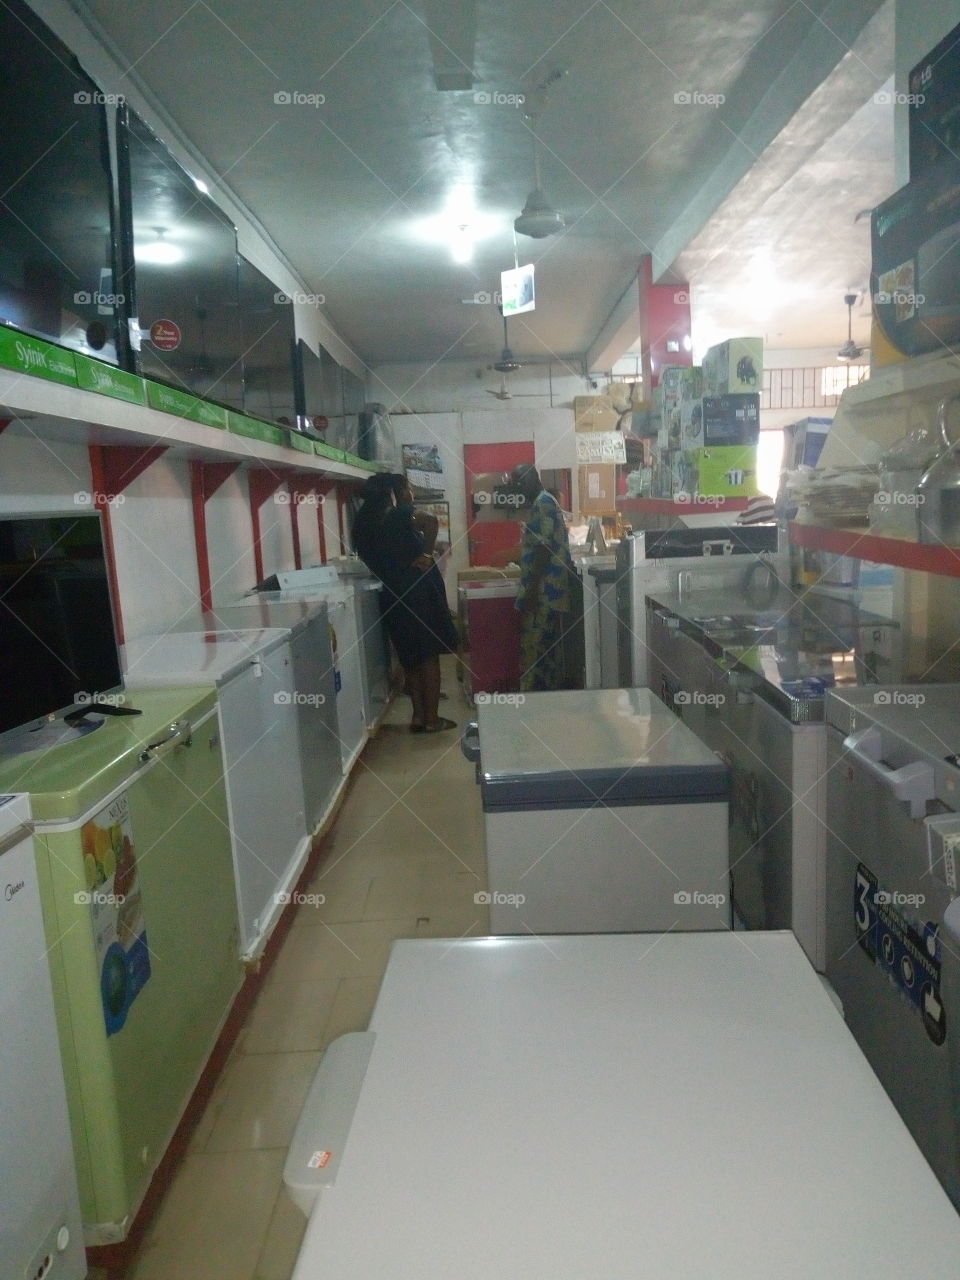 looking for home appliances? This is a store to visit